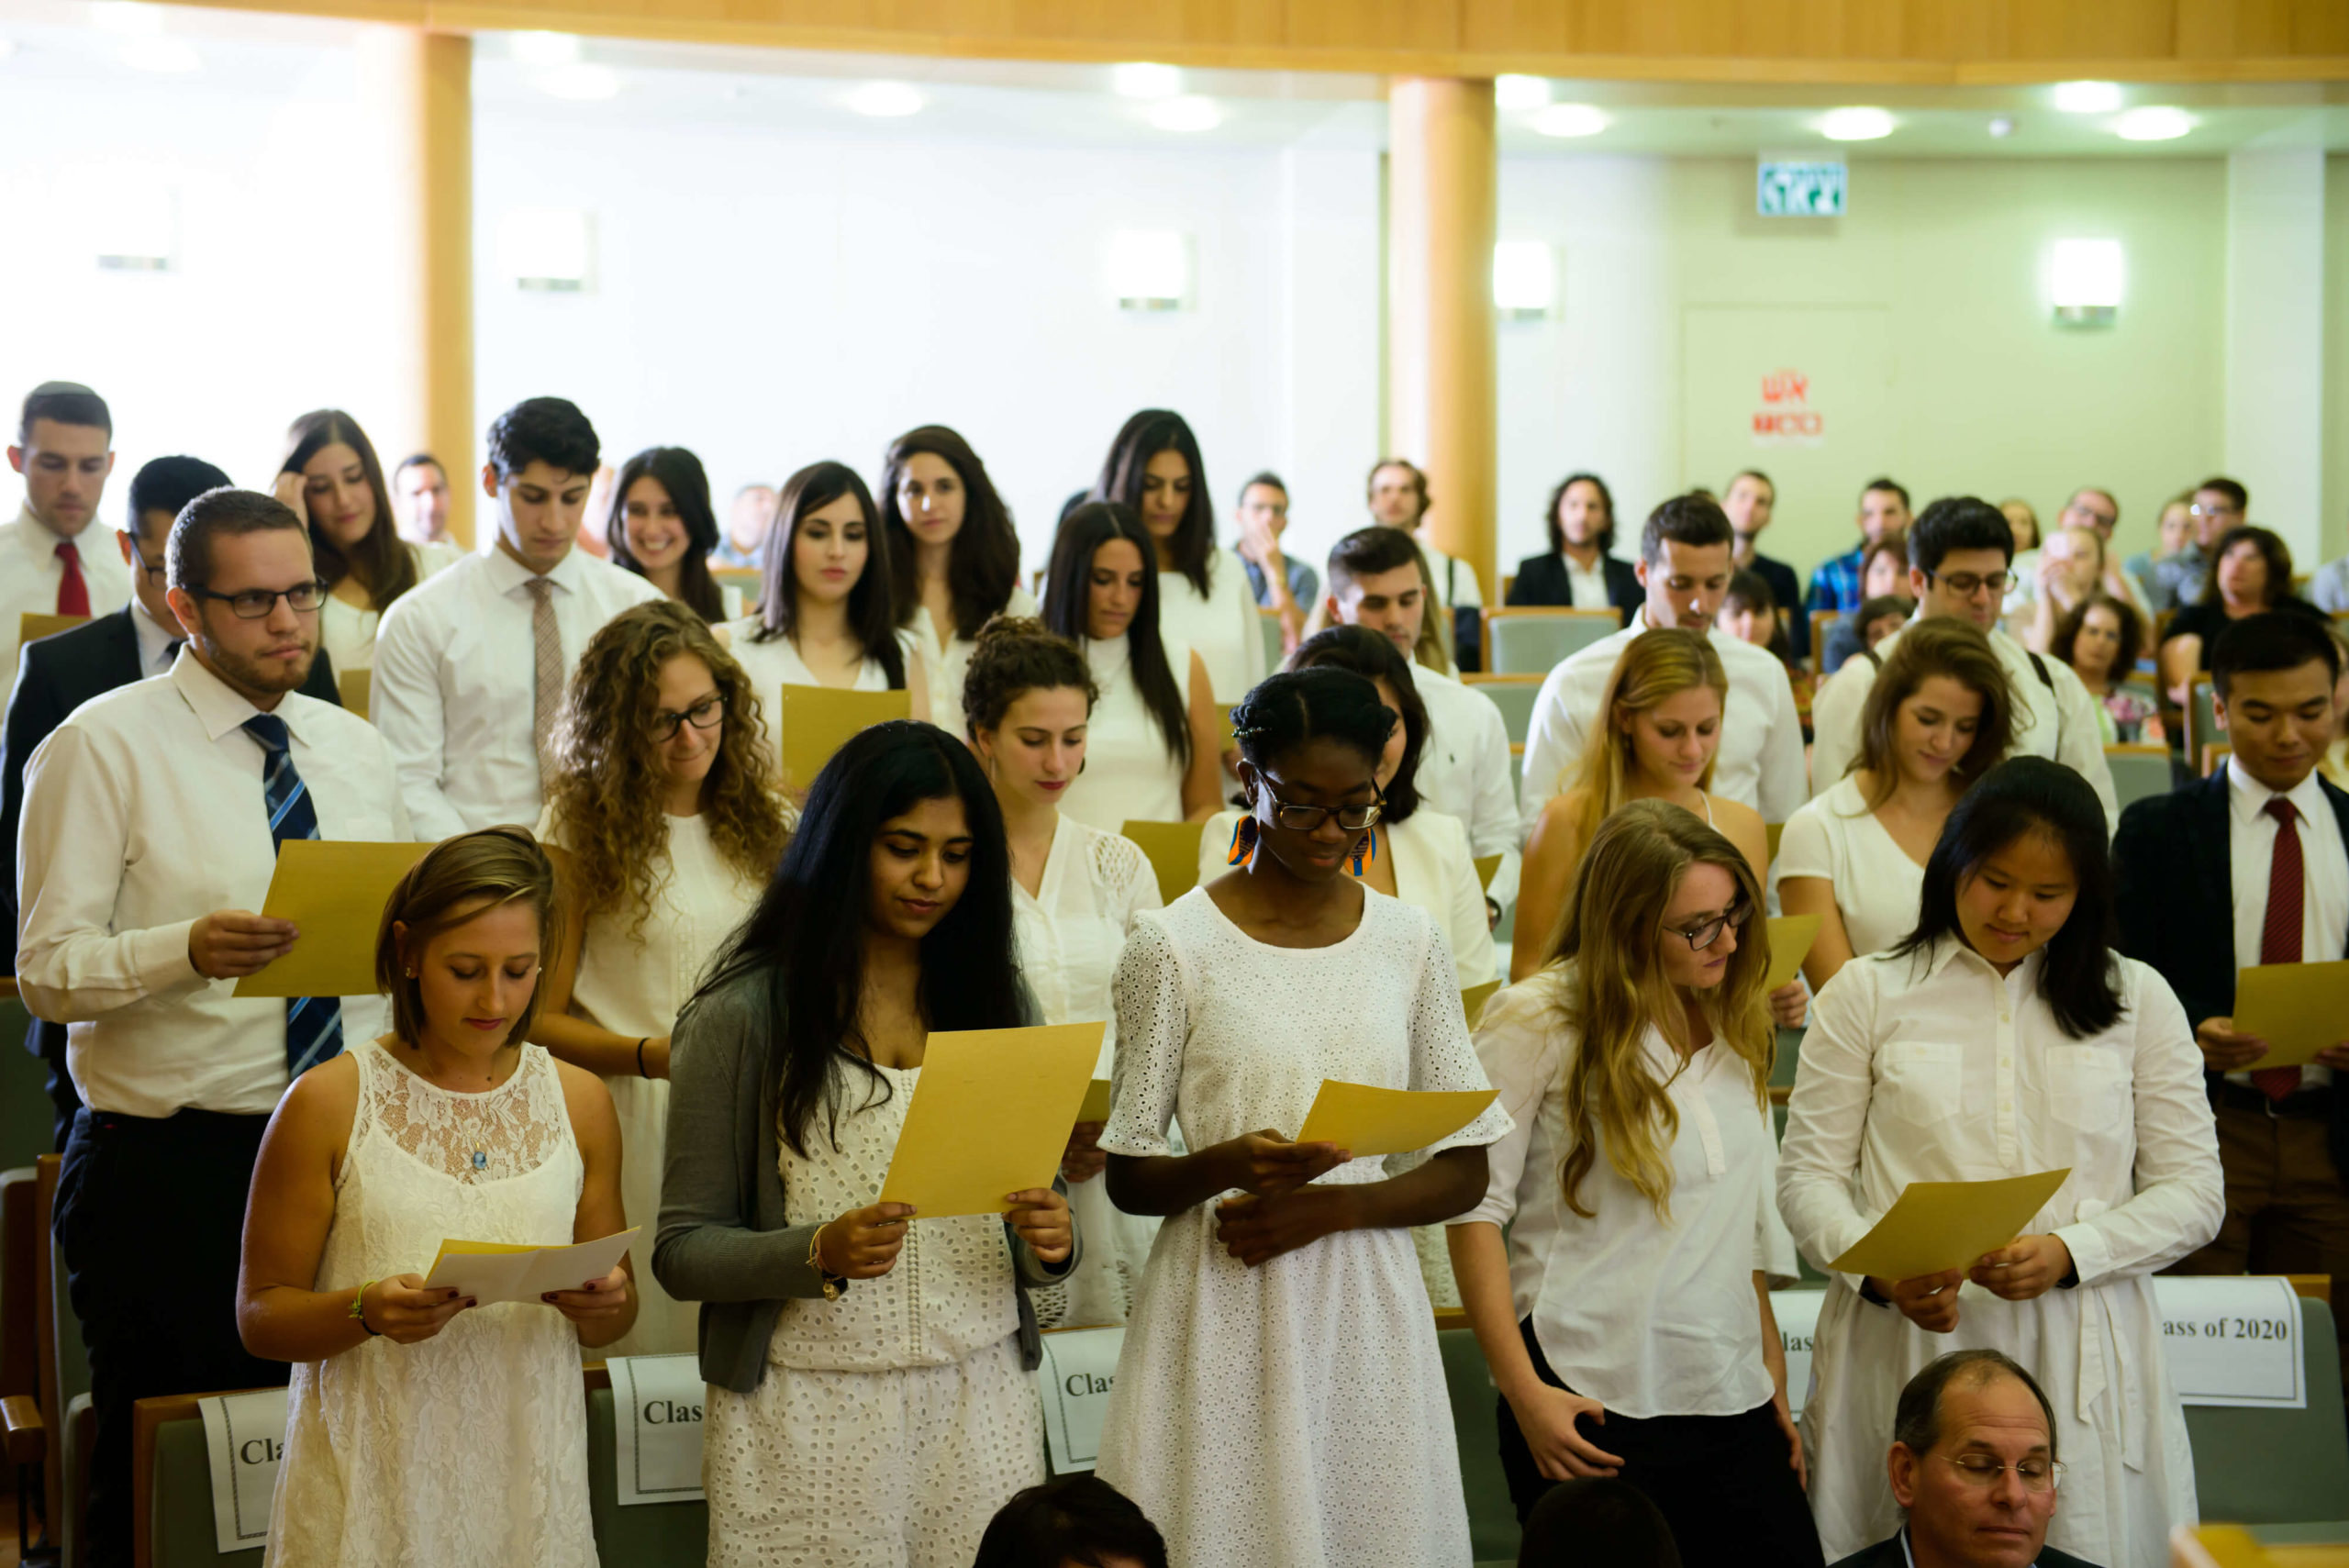 Students gathered to read an oath